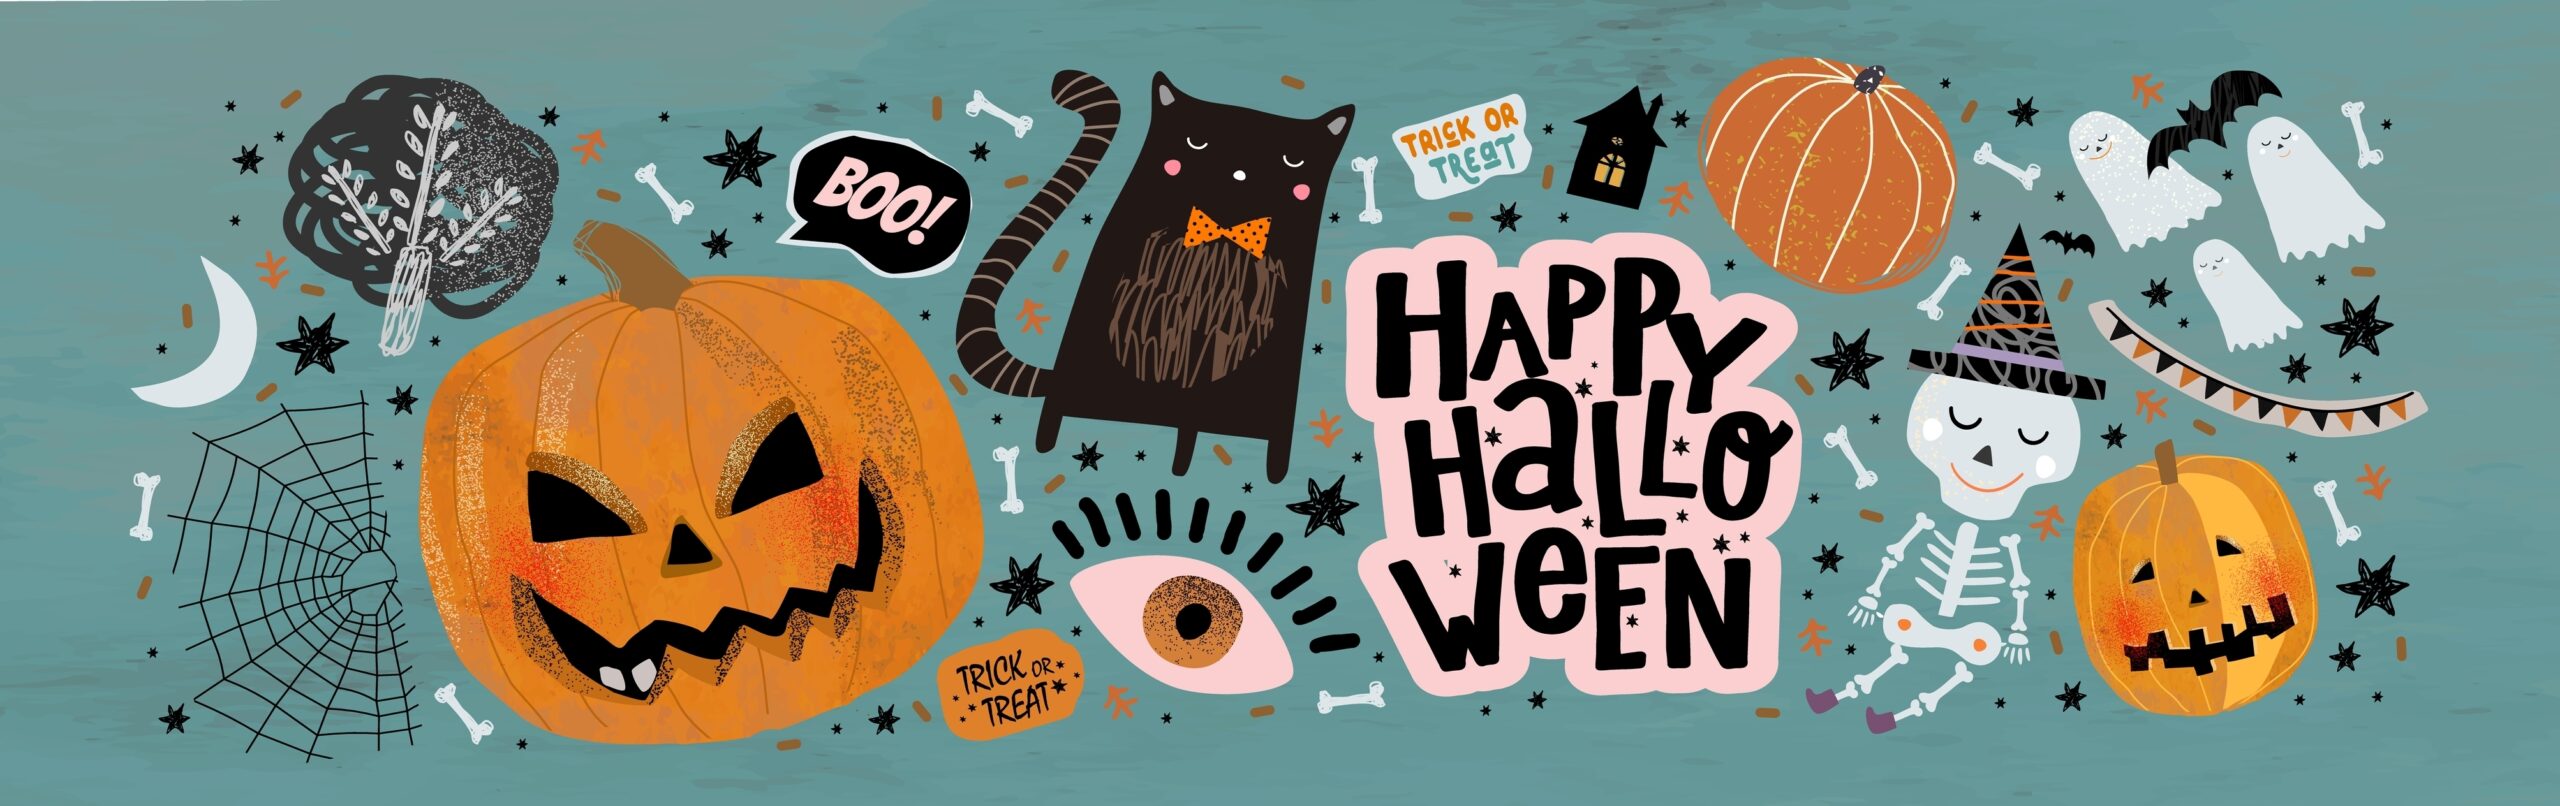 Halloween ideas for families & Halloween vocabulary you need to know!